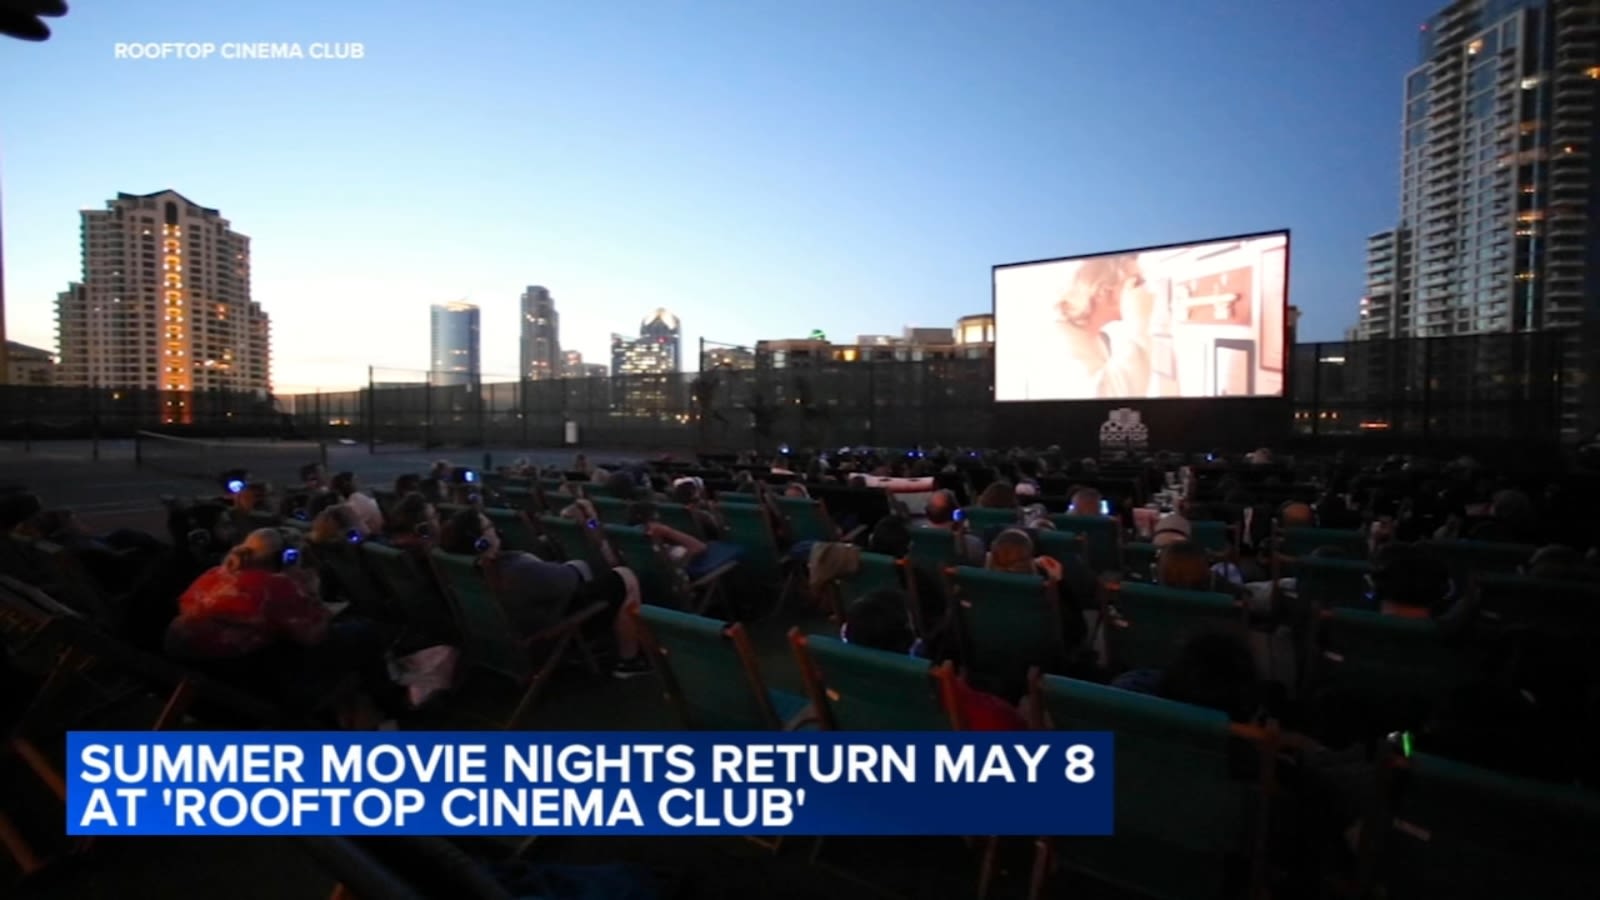 Rooftop Cinema Club returns for summer movie nights atop The Emily Hotel in Chicago's Fulton Market